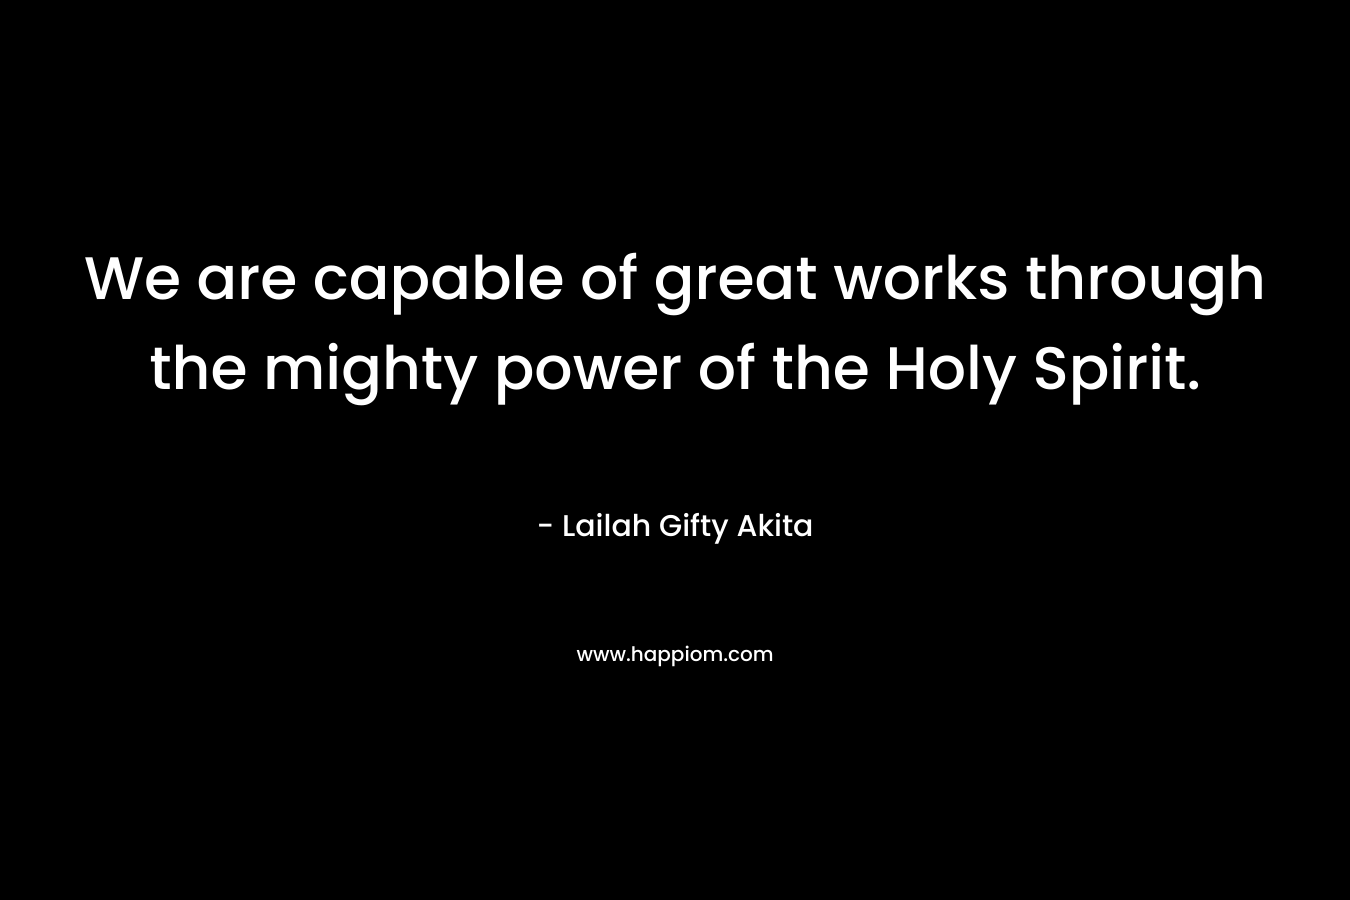 We are capable of great works through the mighty power of the Holy Spirit.